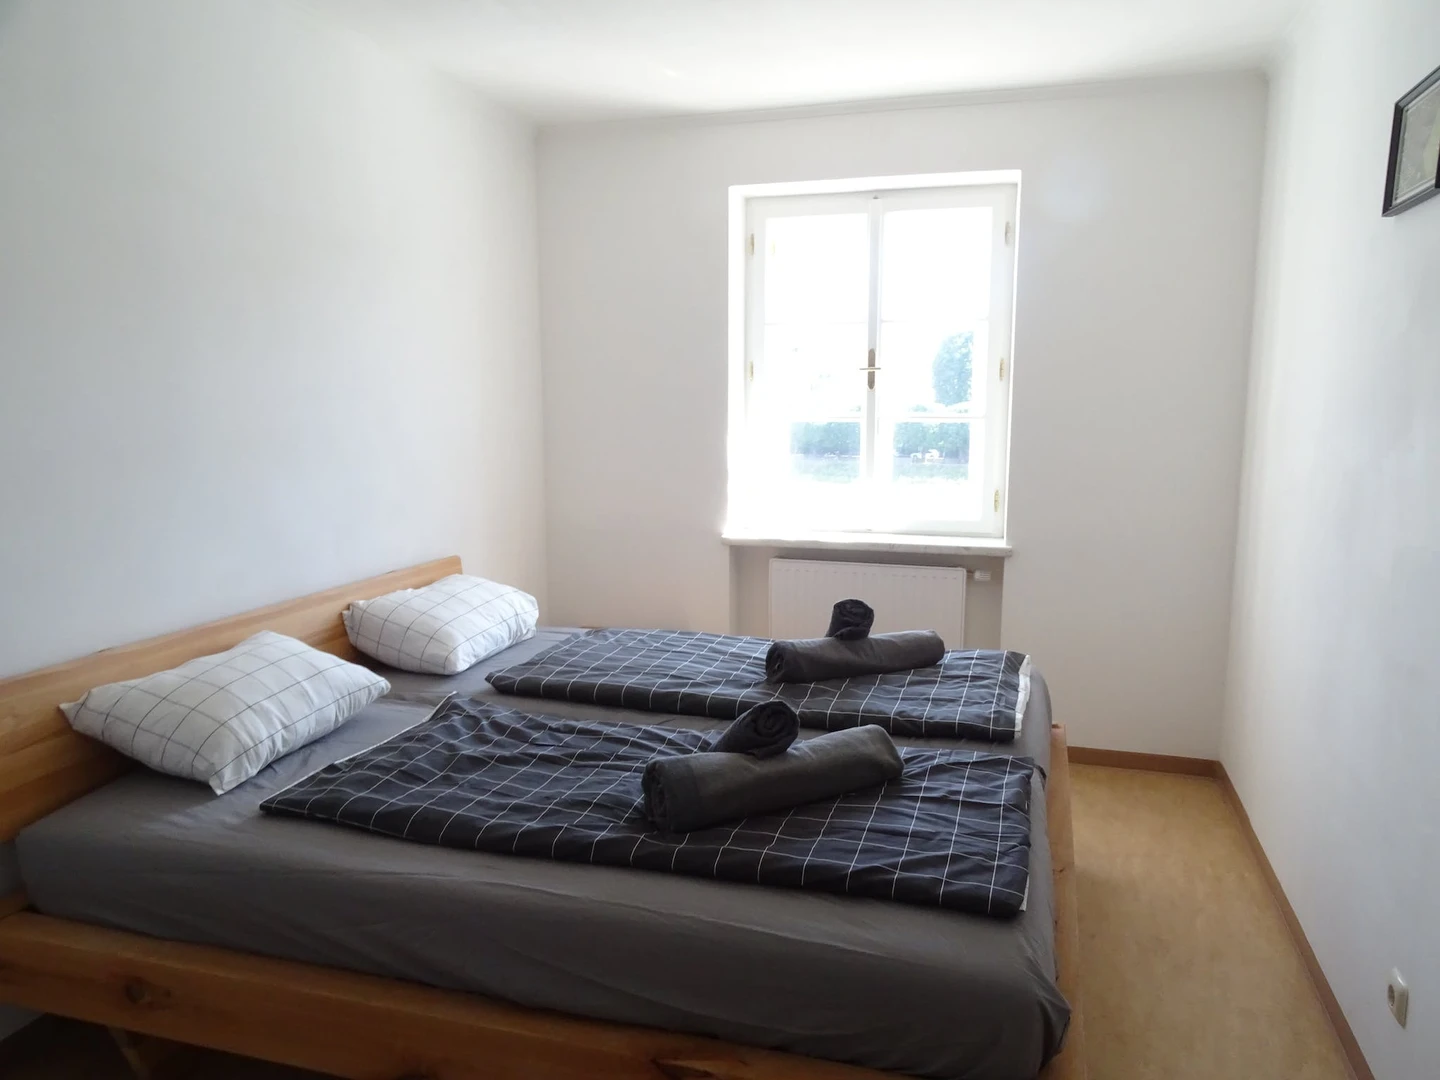 Room for rent in a shared flat in Salzburg